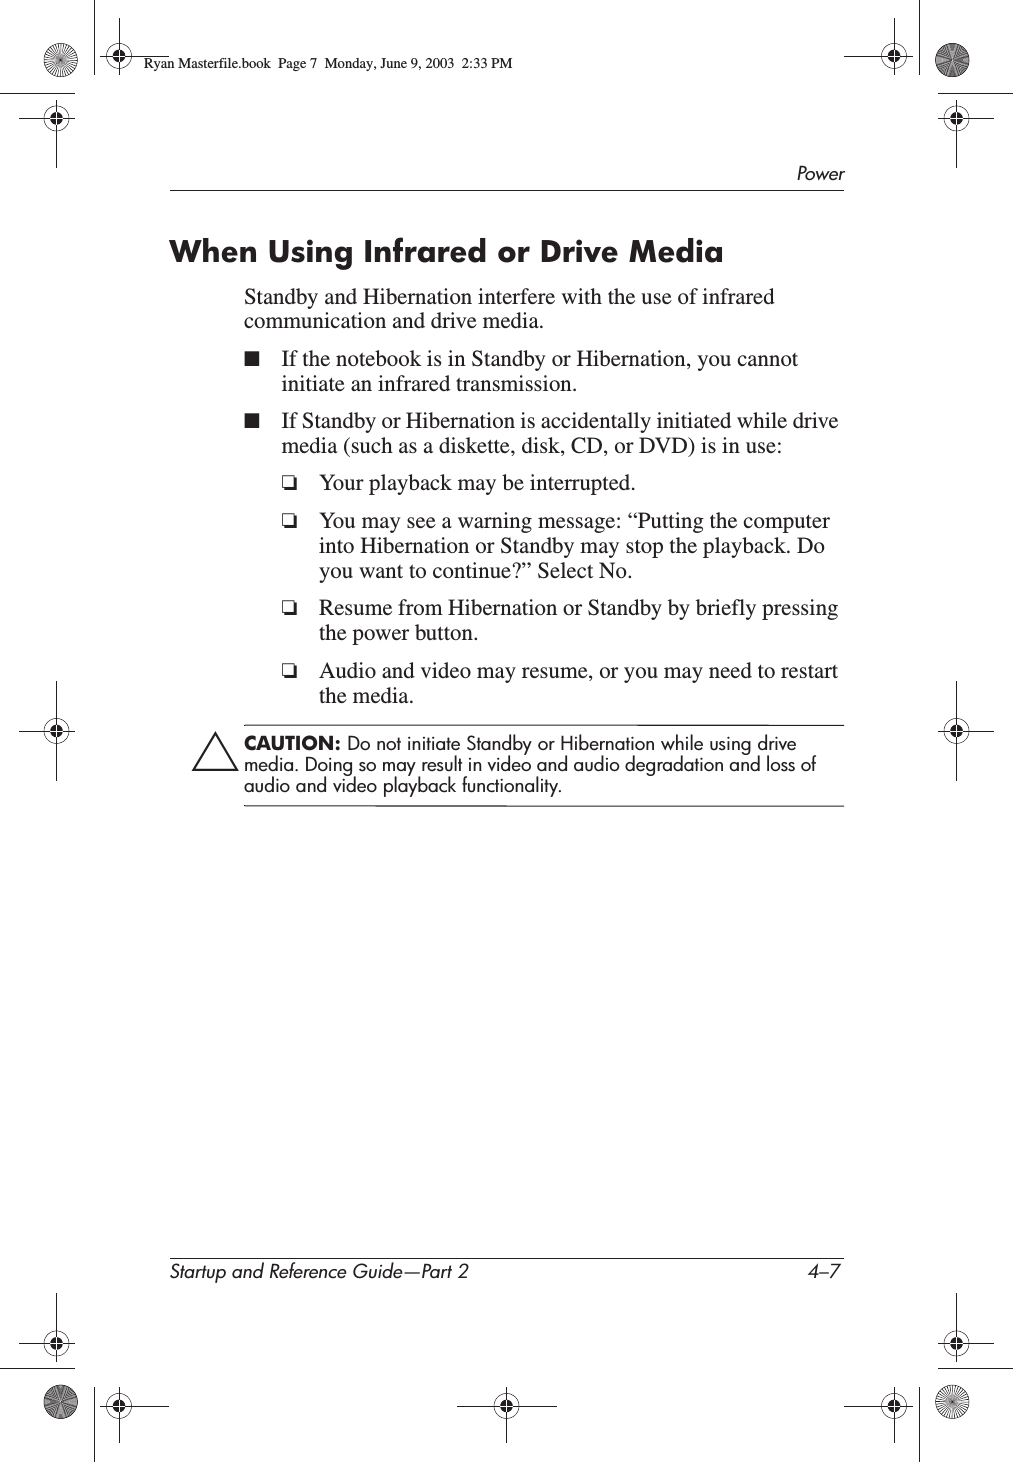 PowerStartup and Reference Guide—Part 2 4–7When Using Infrared or Drive MediaStandby and Hibernation interfere with the use of infrared communication and drive media.■If the notebook is in Standby or Hibernation, you cannot initiate an infrared transmission.■If Standby or Hibernation is accidentally initiated while drive media (such as a diskette, disk, CD, or DVD) is in use:❏Your playback may be interrupted.❏You may see a warning message: “Putting the computer into Hibernation or Standby may stop the playback. Do you want to continue?” Select No.❏Resume from Hibernation or Standby by briefly pressing the power button.❏Audio and video may resume, or you may need to restart the media.ÄCAUTION: Do not initiate Standby or Hibernation while using drive media. Doing so may result in video and audio degradation and loss of audio and video playback functionality.Ryan Masterfile.book  Page 7  Monday, June 9, 2003  2:33 PM